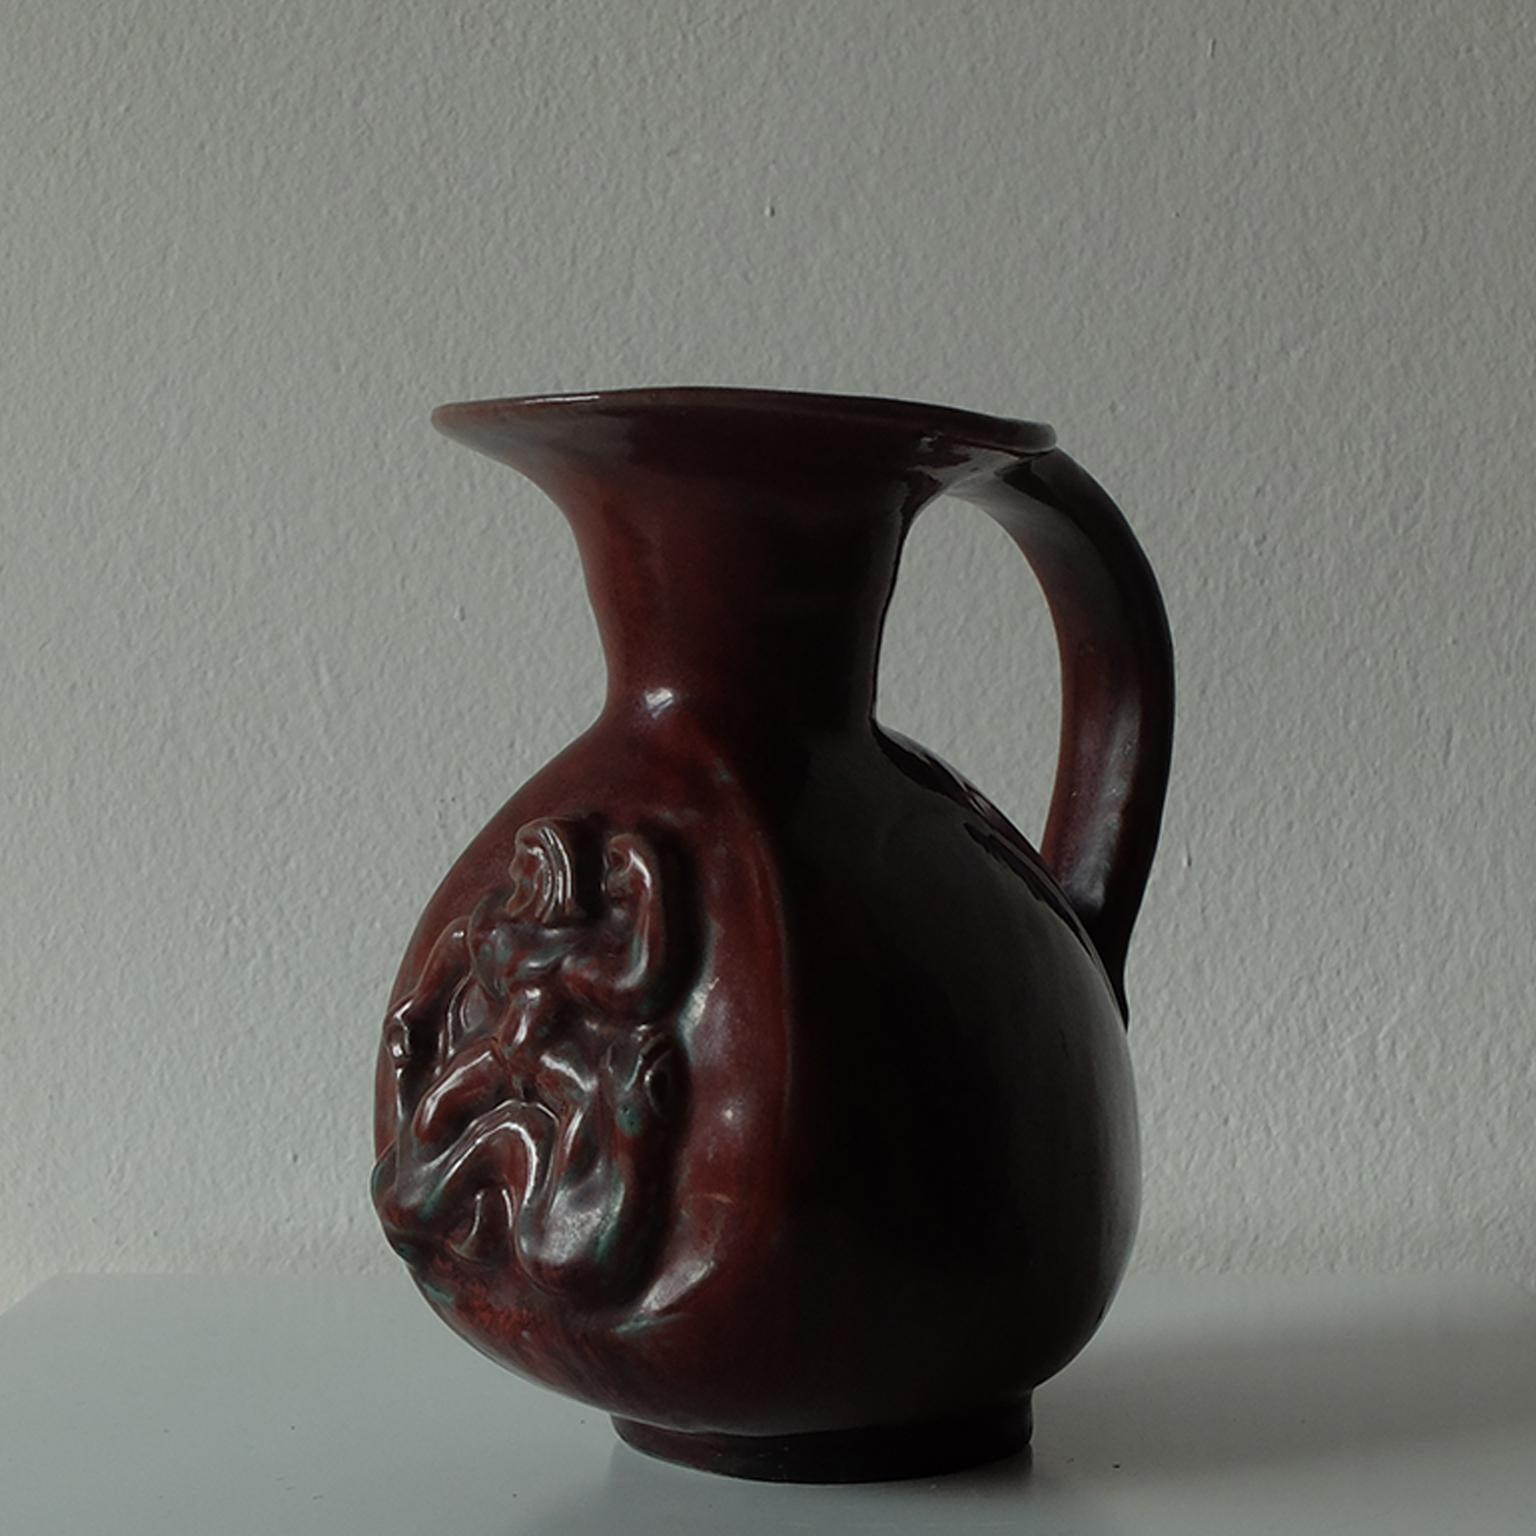 Bode Willumsen for Royal Copenhagen, beautiful footed stoneware pitcher in rare deep earthy red glazed ceramic, 1940s.

Designed by Danish ceramist Bode Willumsen and manufactured by Royal Copenhagen in the early 1940s, this piece is fully signed